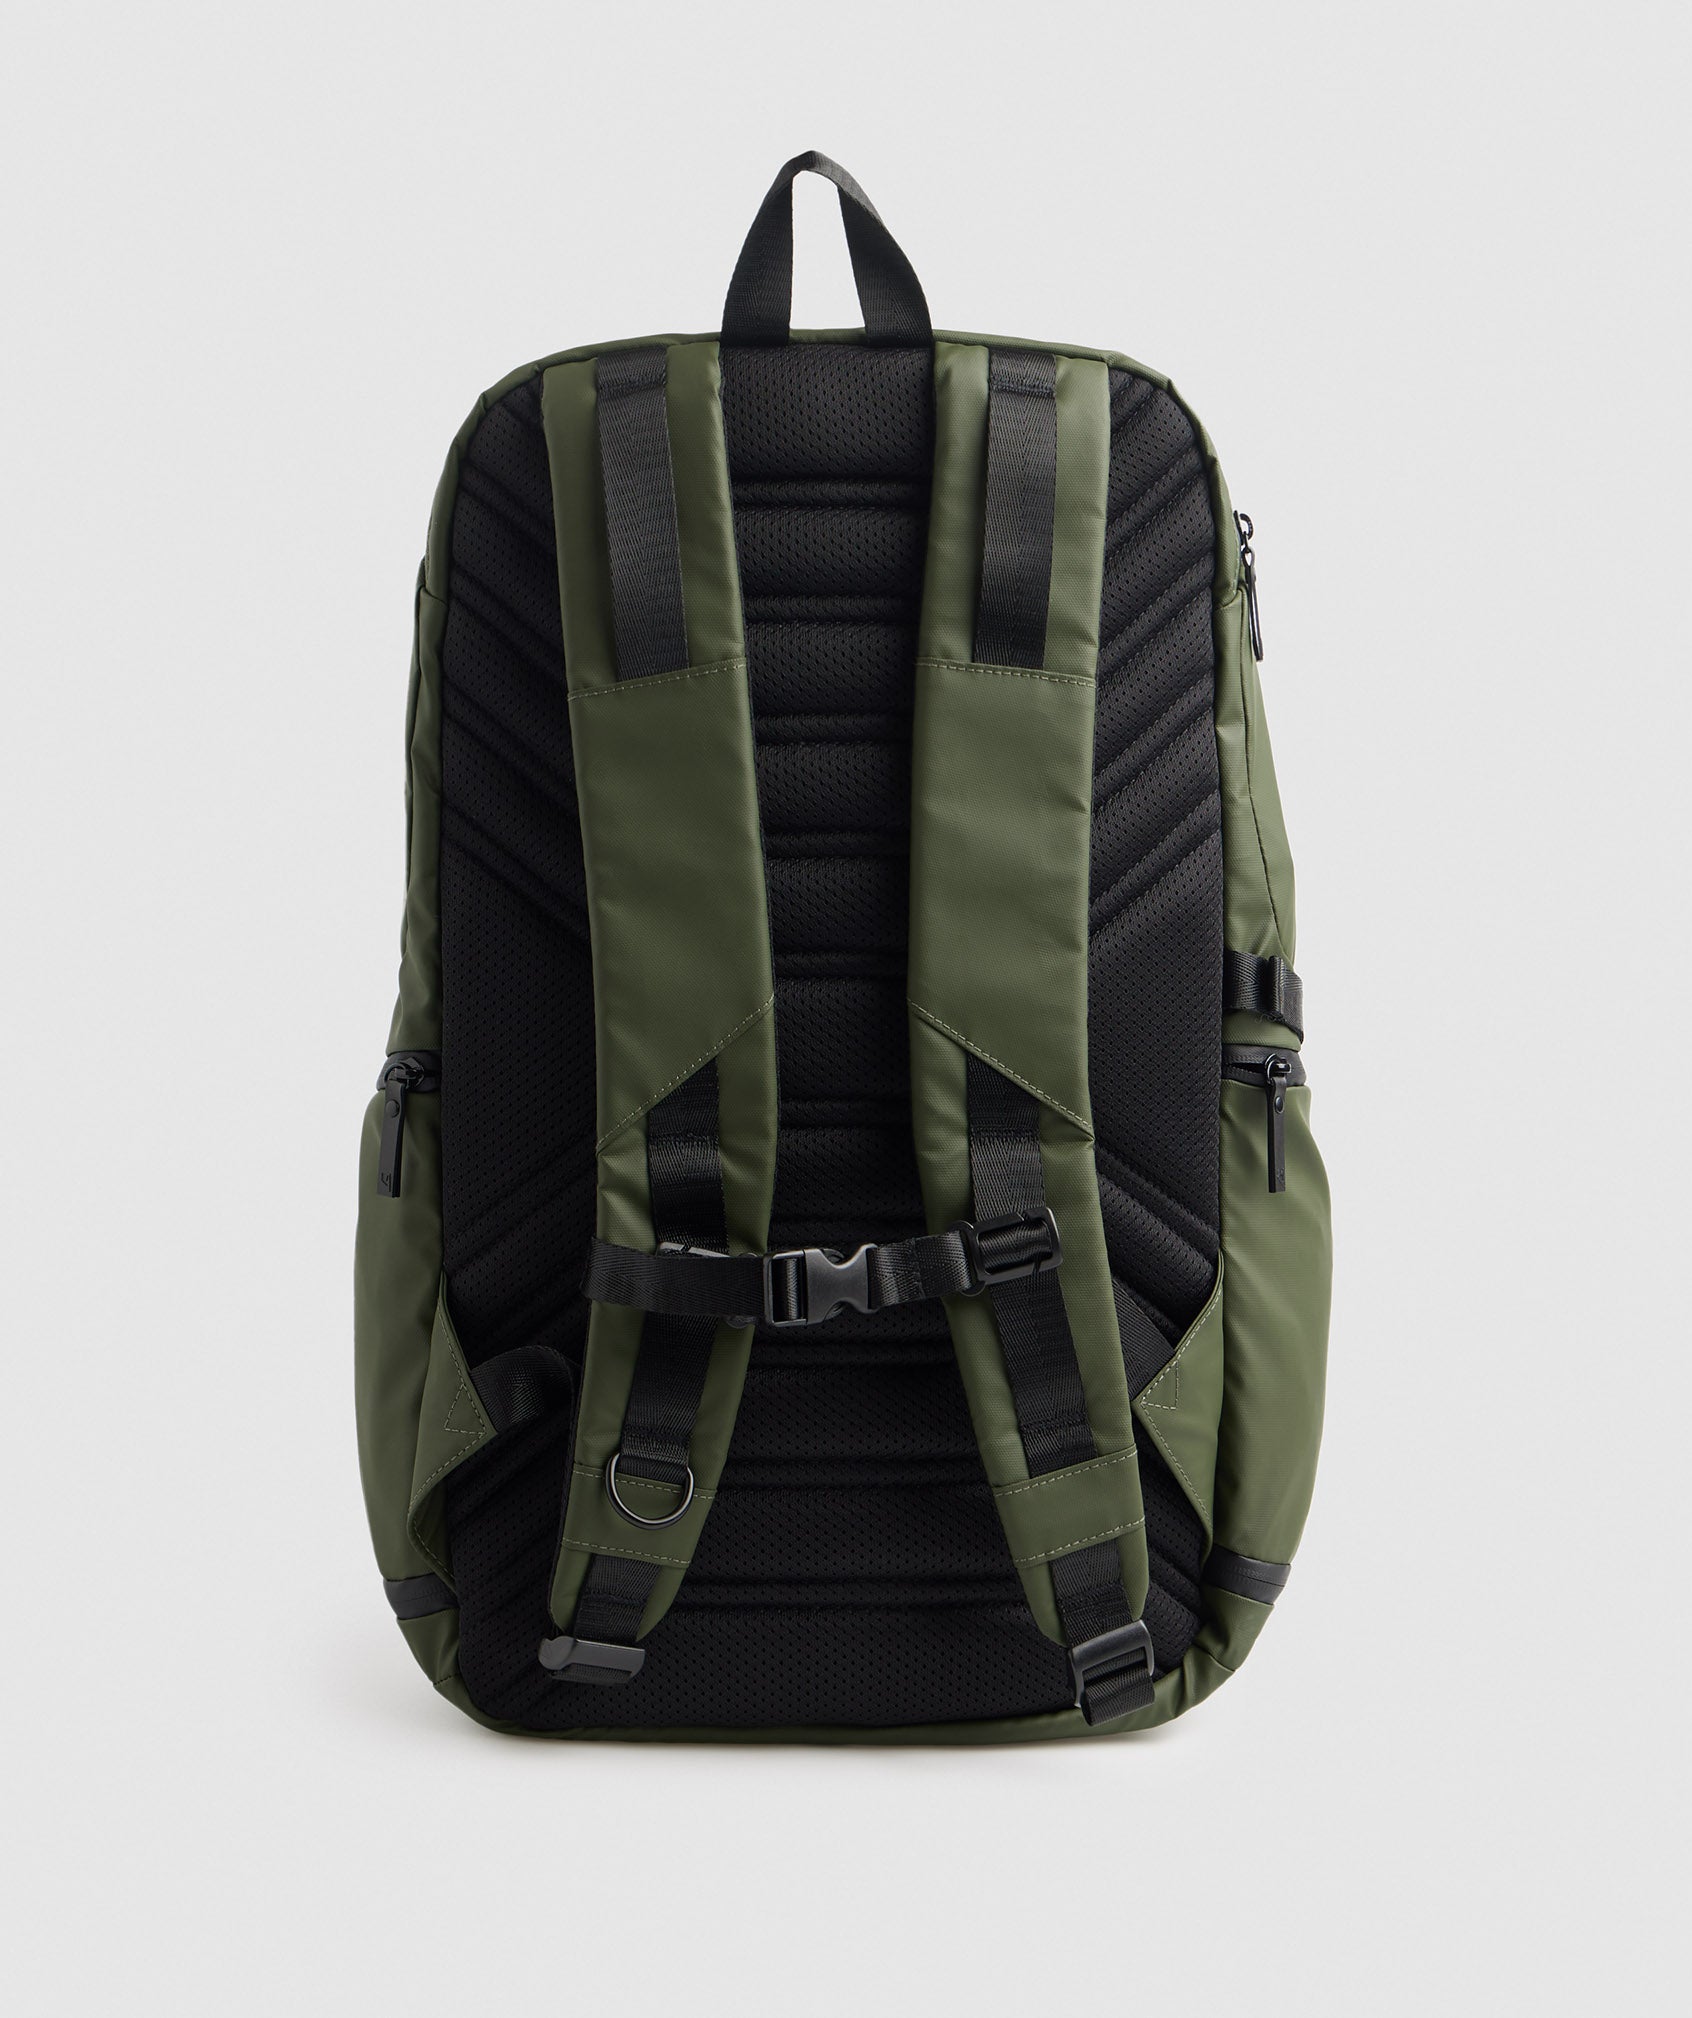 X-Series 0.3 Backpack in Core Olive - view 4